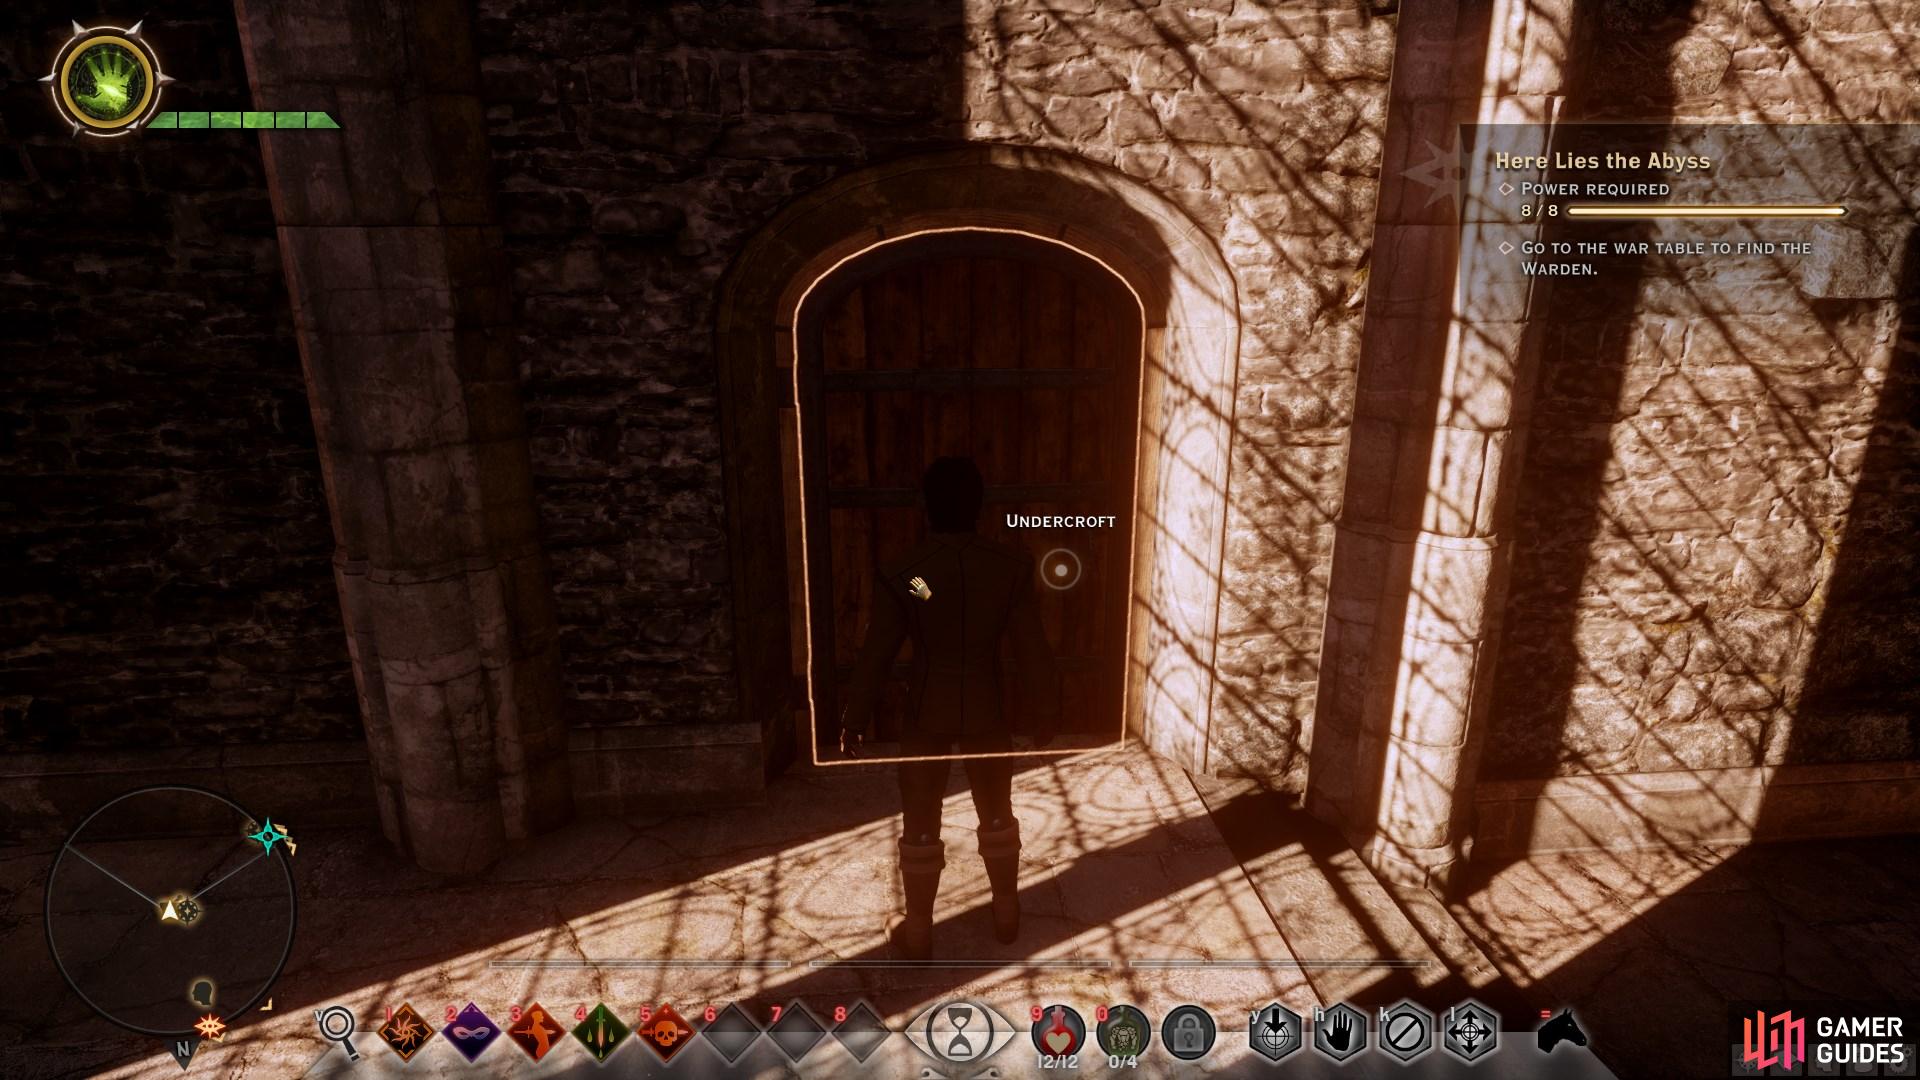 Once you've completed Acquire the Arcanist from the war table, go to the Undercroft through the door beside the throne.